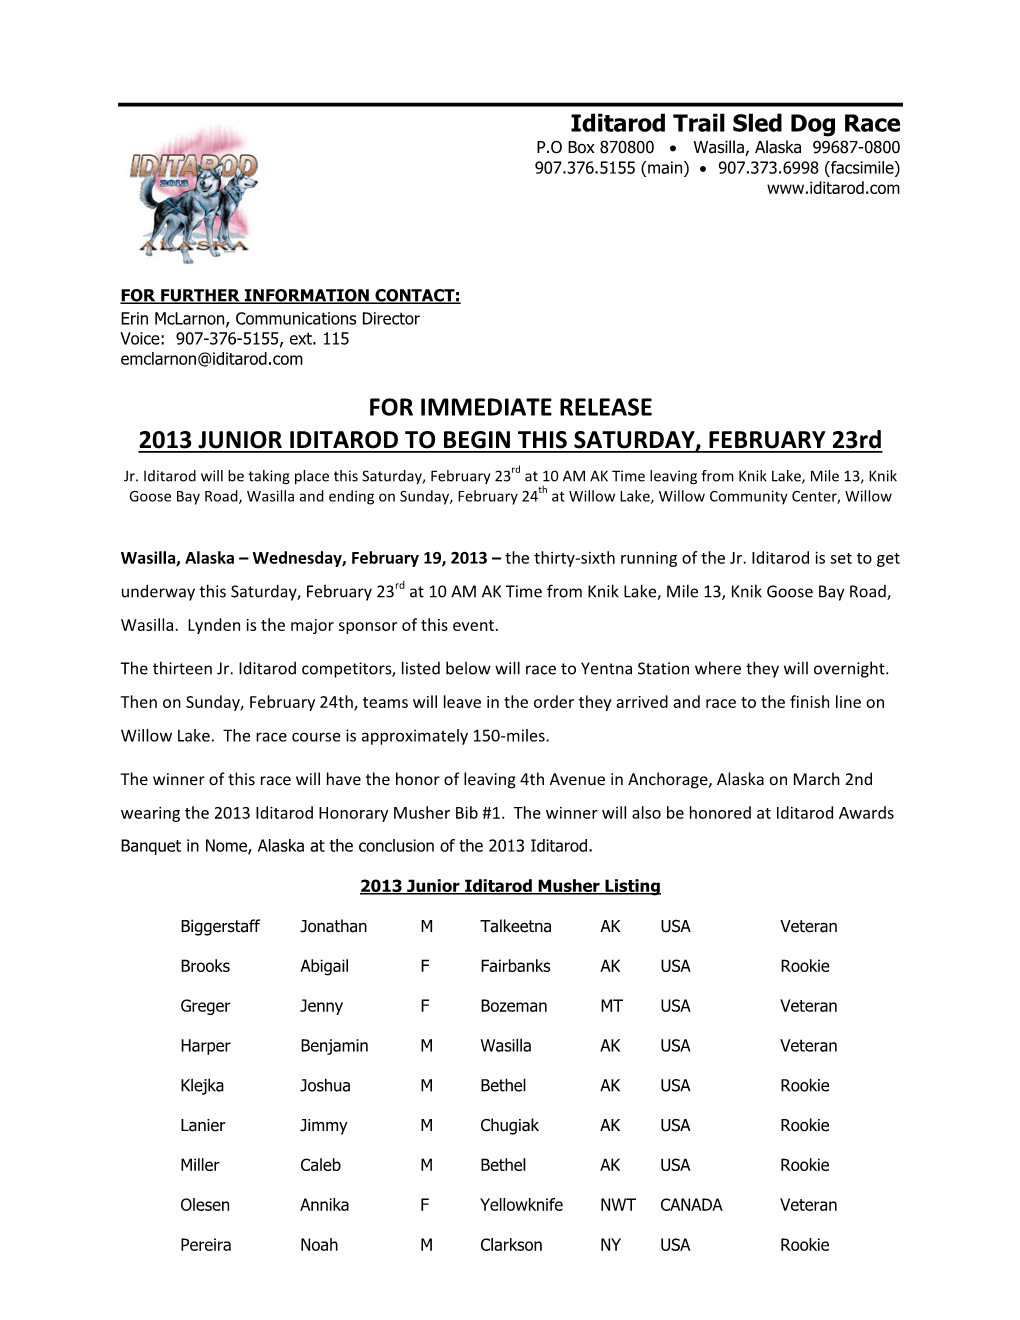 FOR IMMEDIATE RELEASE 2013 JUNIOR IDITAROD to BEGIN THIS SATURDAY, FEBRUARY 23Rd Jr